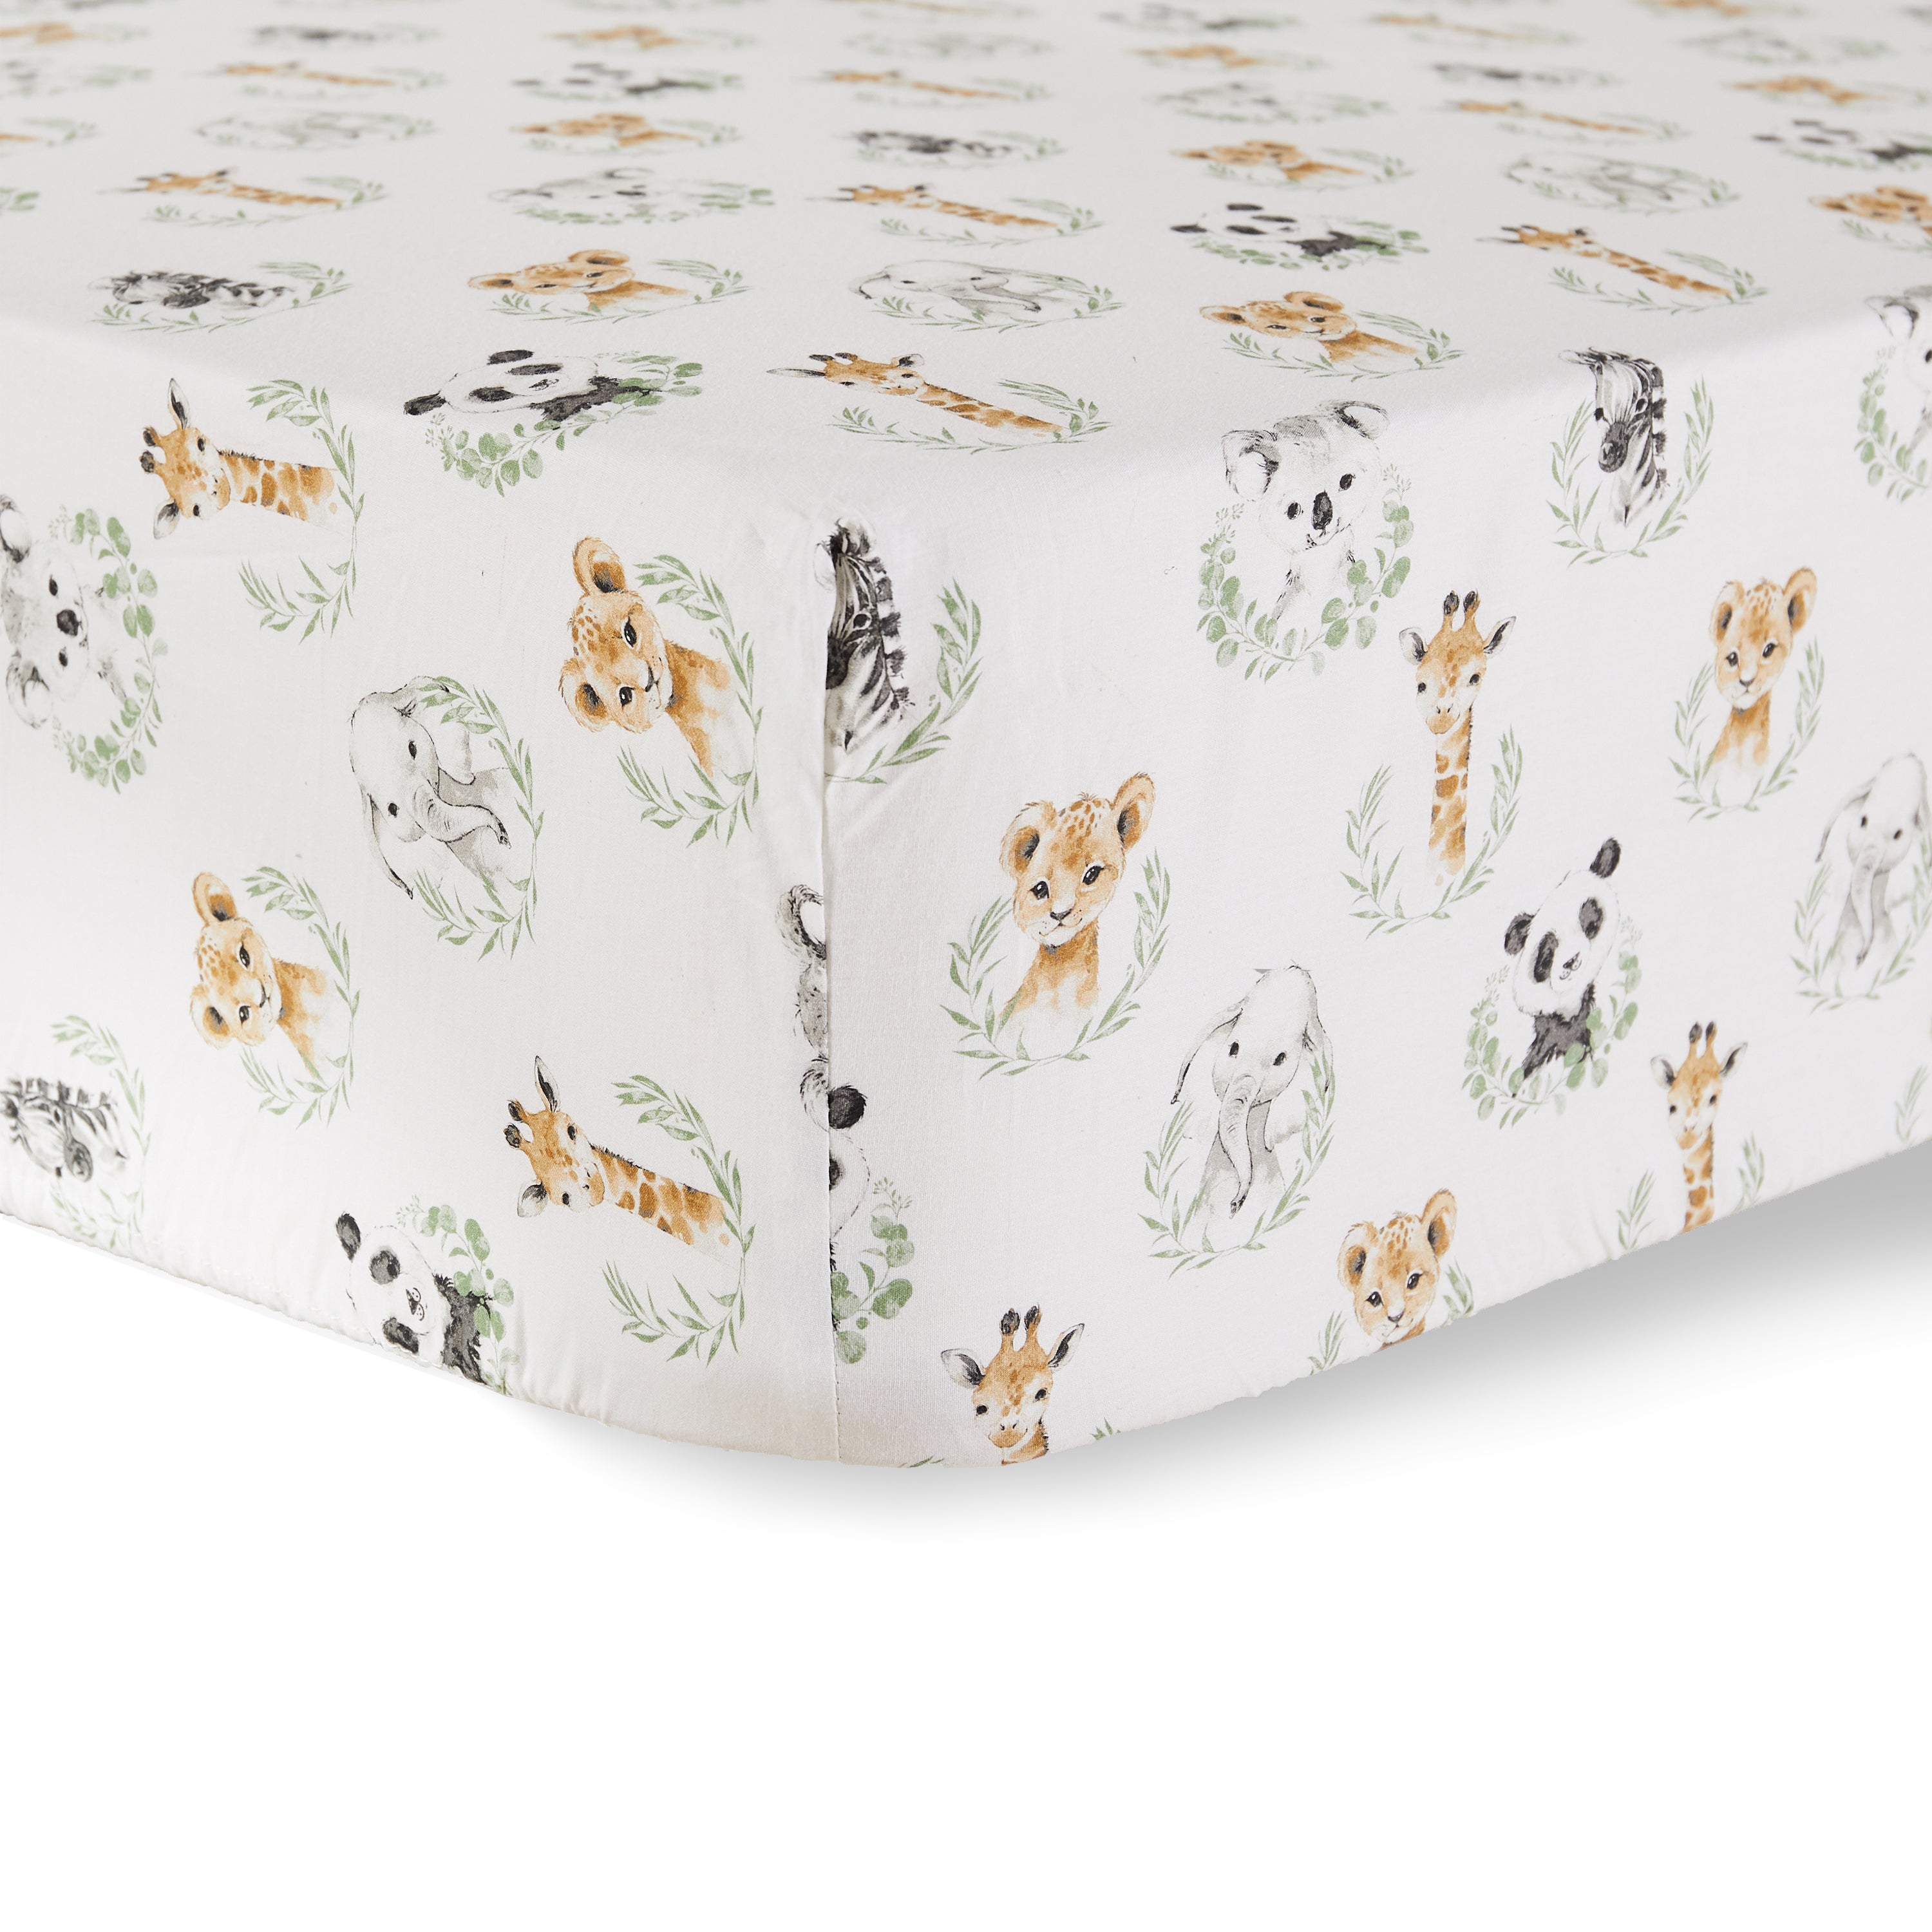 Mozambique Allover Animals Crib Fitted Sheet